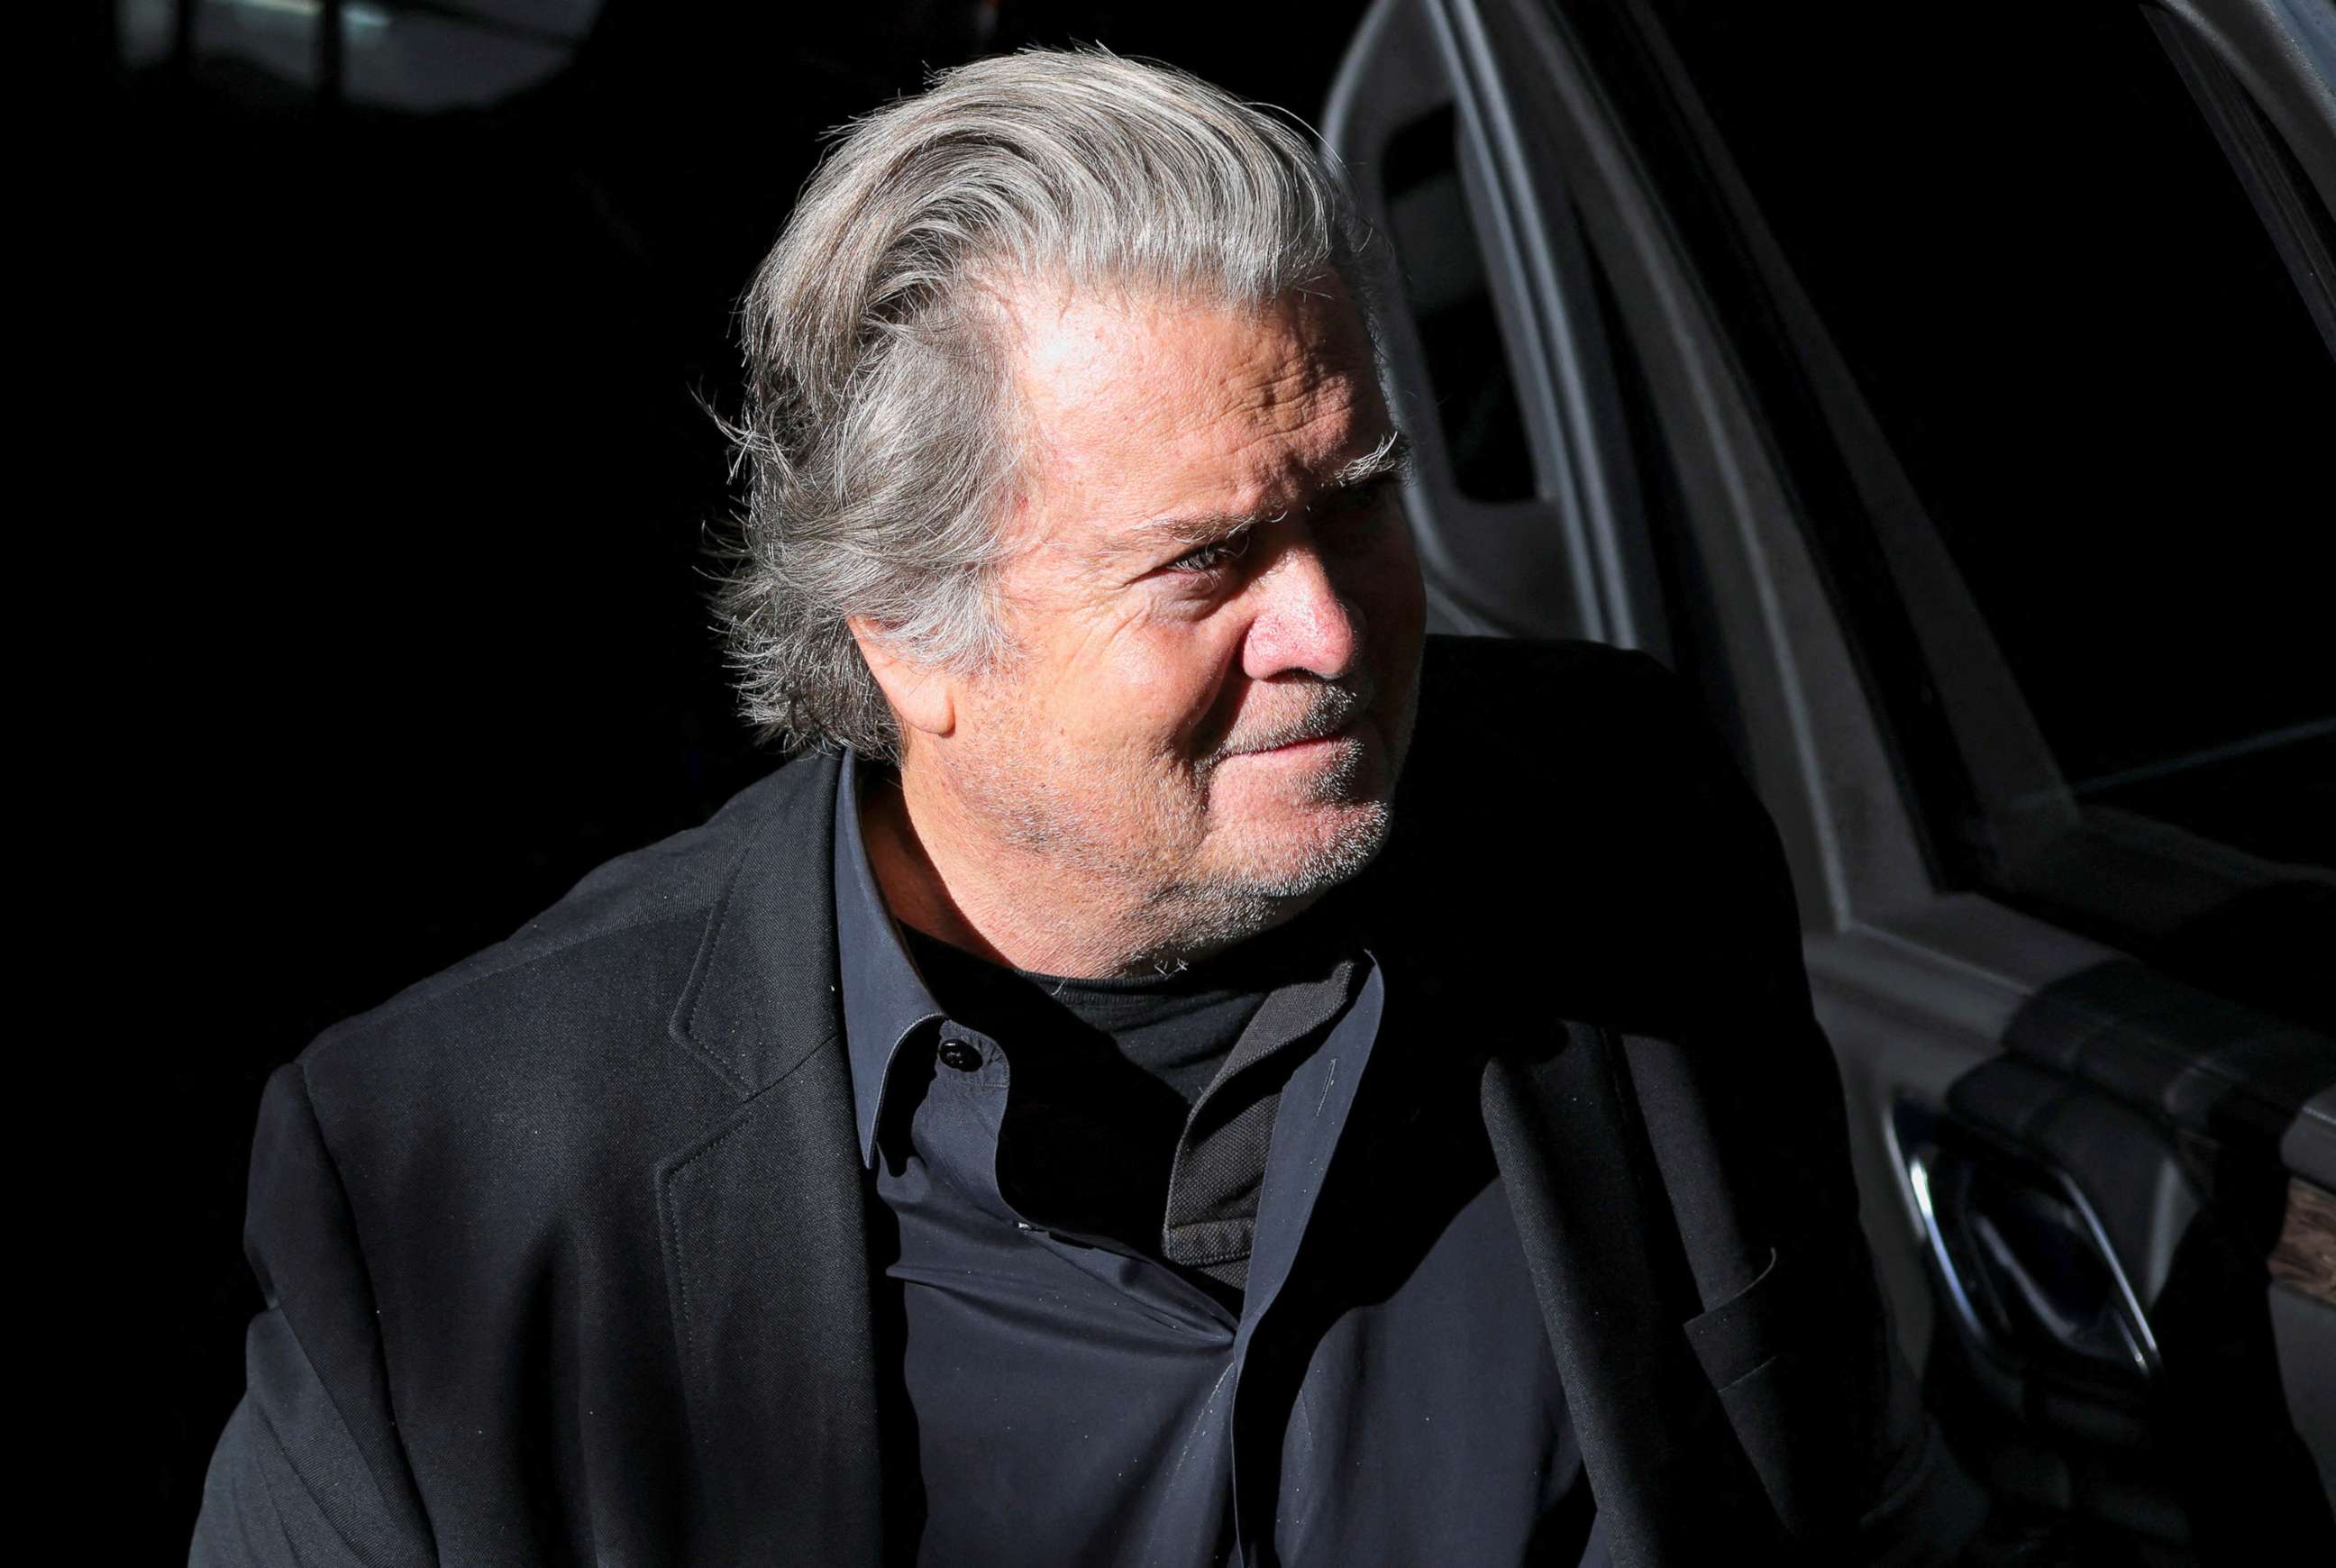 PHOTO: Former U.S. President Donald Trump's White House chief strategist Steve Bannon arrives at the Manhattan District Attorney's Office in New York, Sept. 8, 2022. 